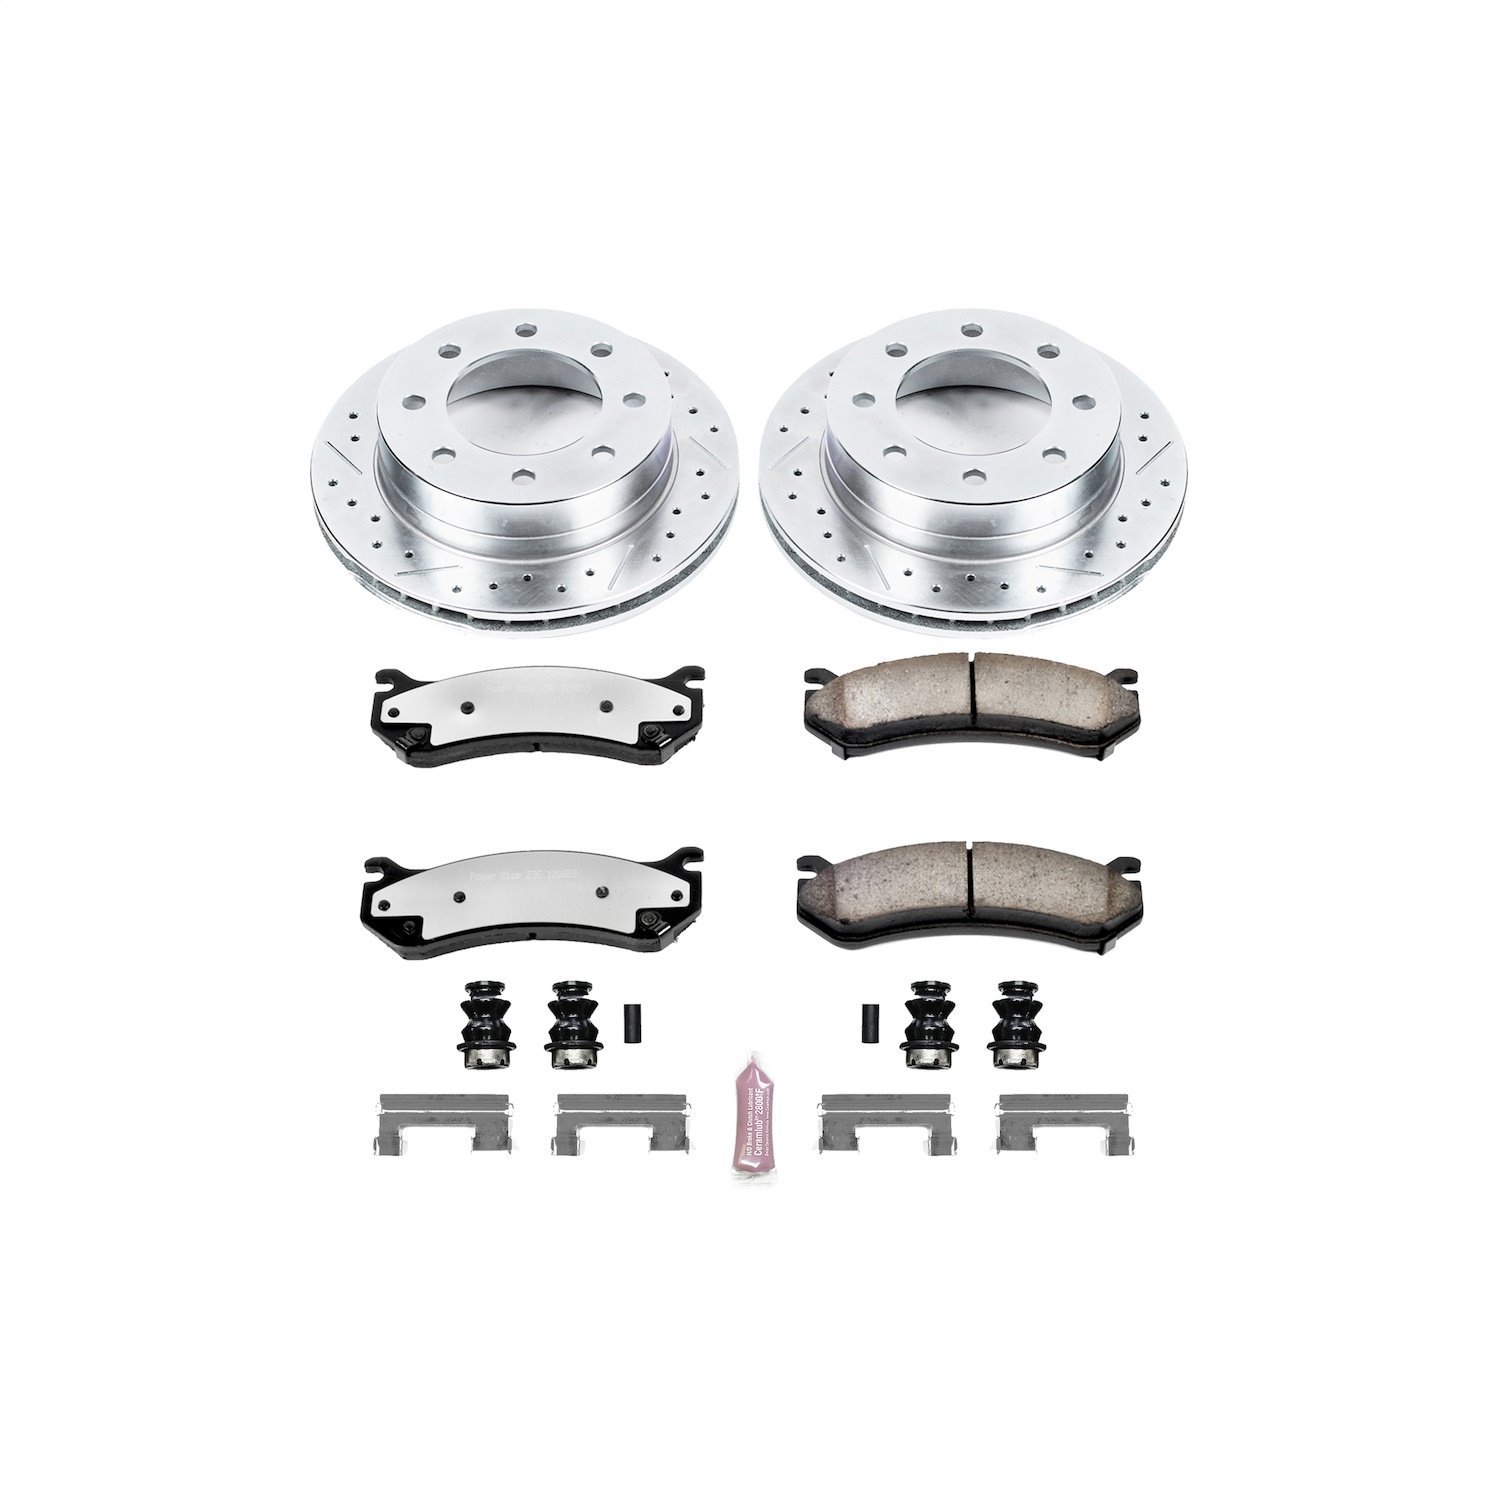 Truck and Towing Z36 Brake Pad & Rotor Kit Cross-Drilled and Slotted Rotors Z36 Carbon Ceramic Brake Pads Complete Rear Kit